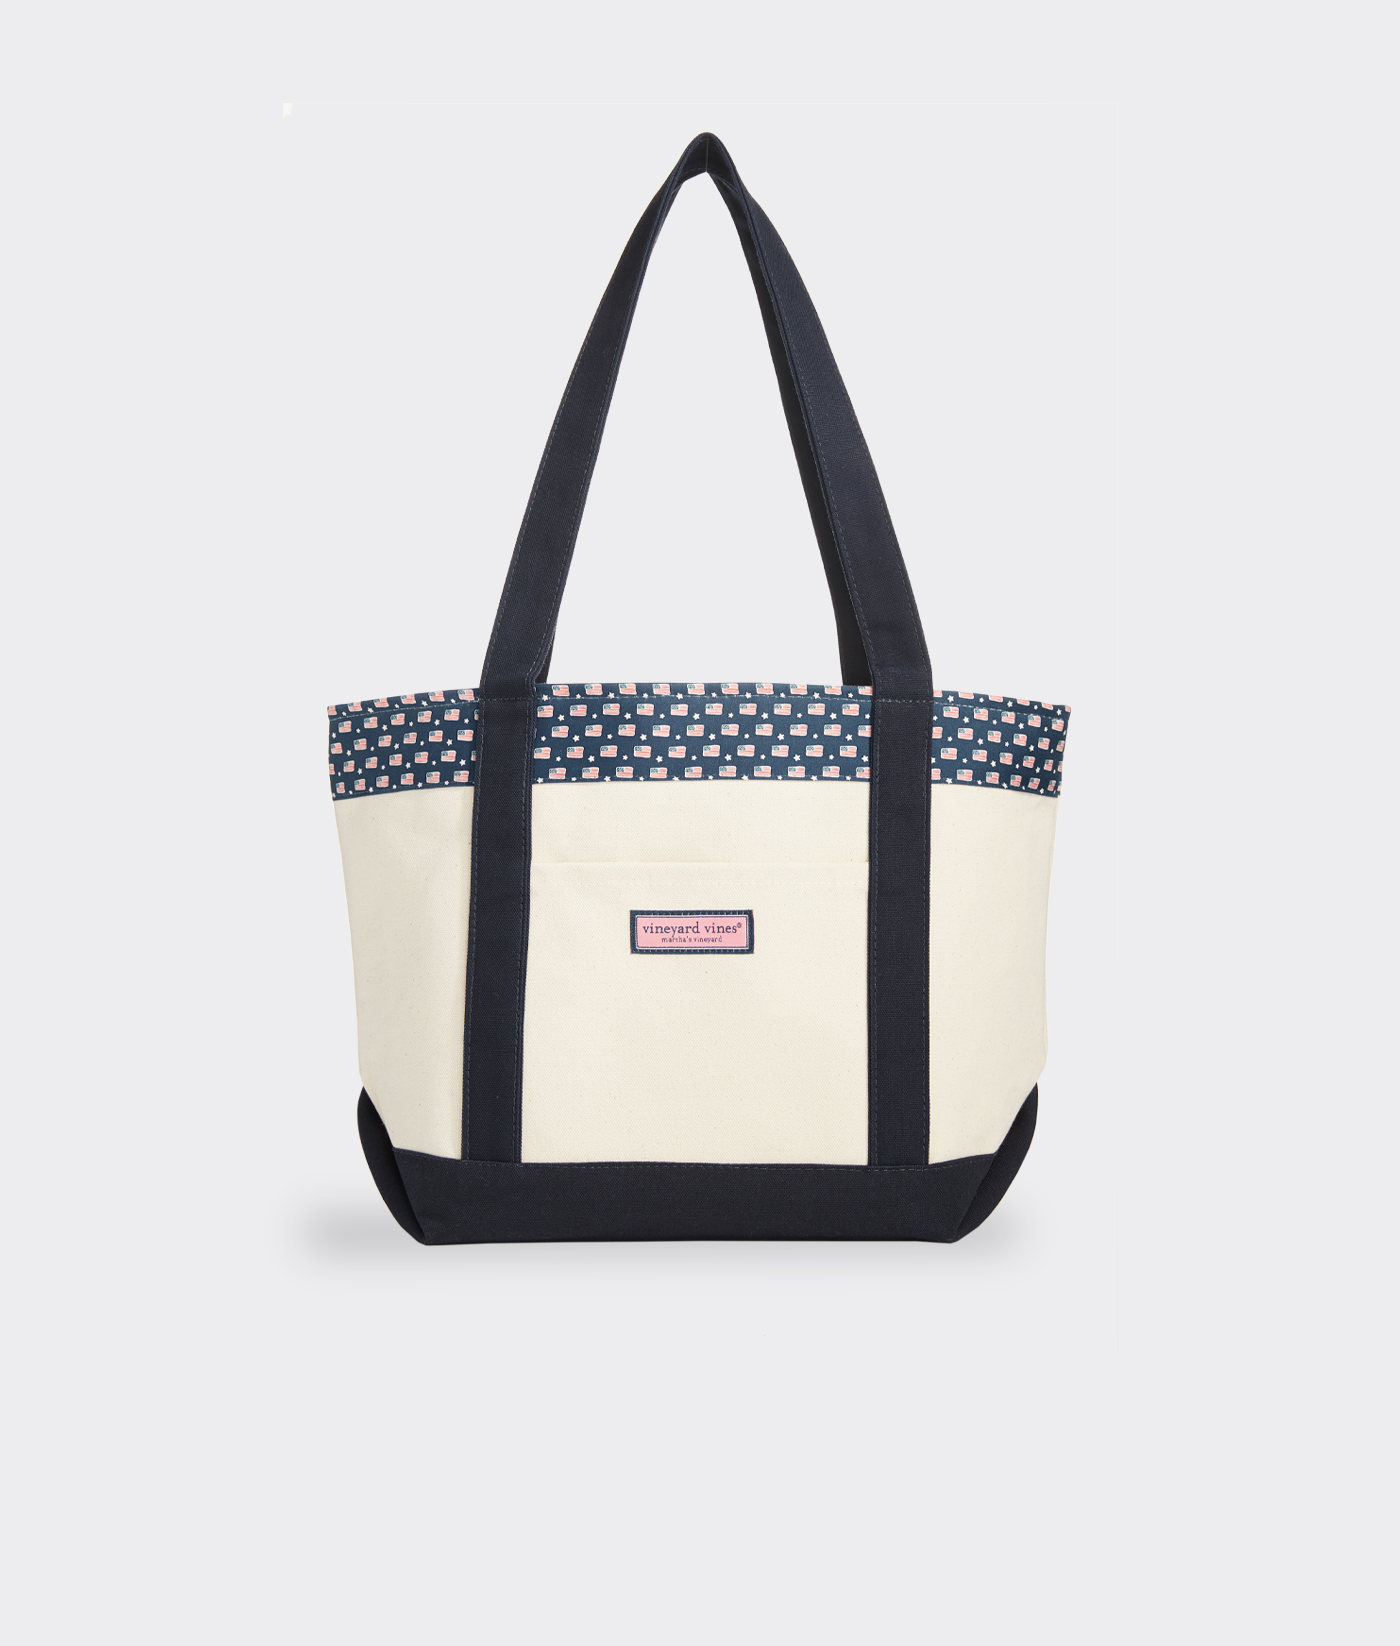 Shop Flags & Stars Classic Tote at vineyard vines